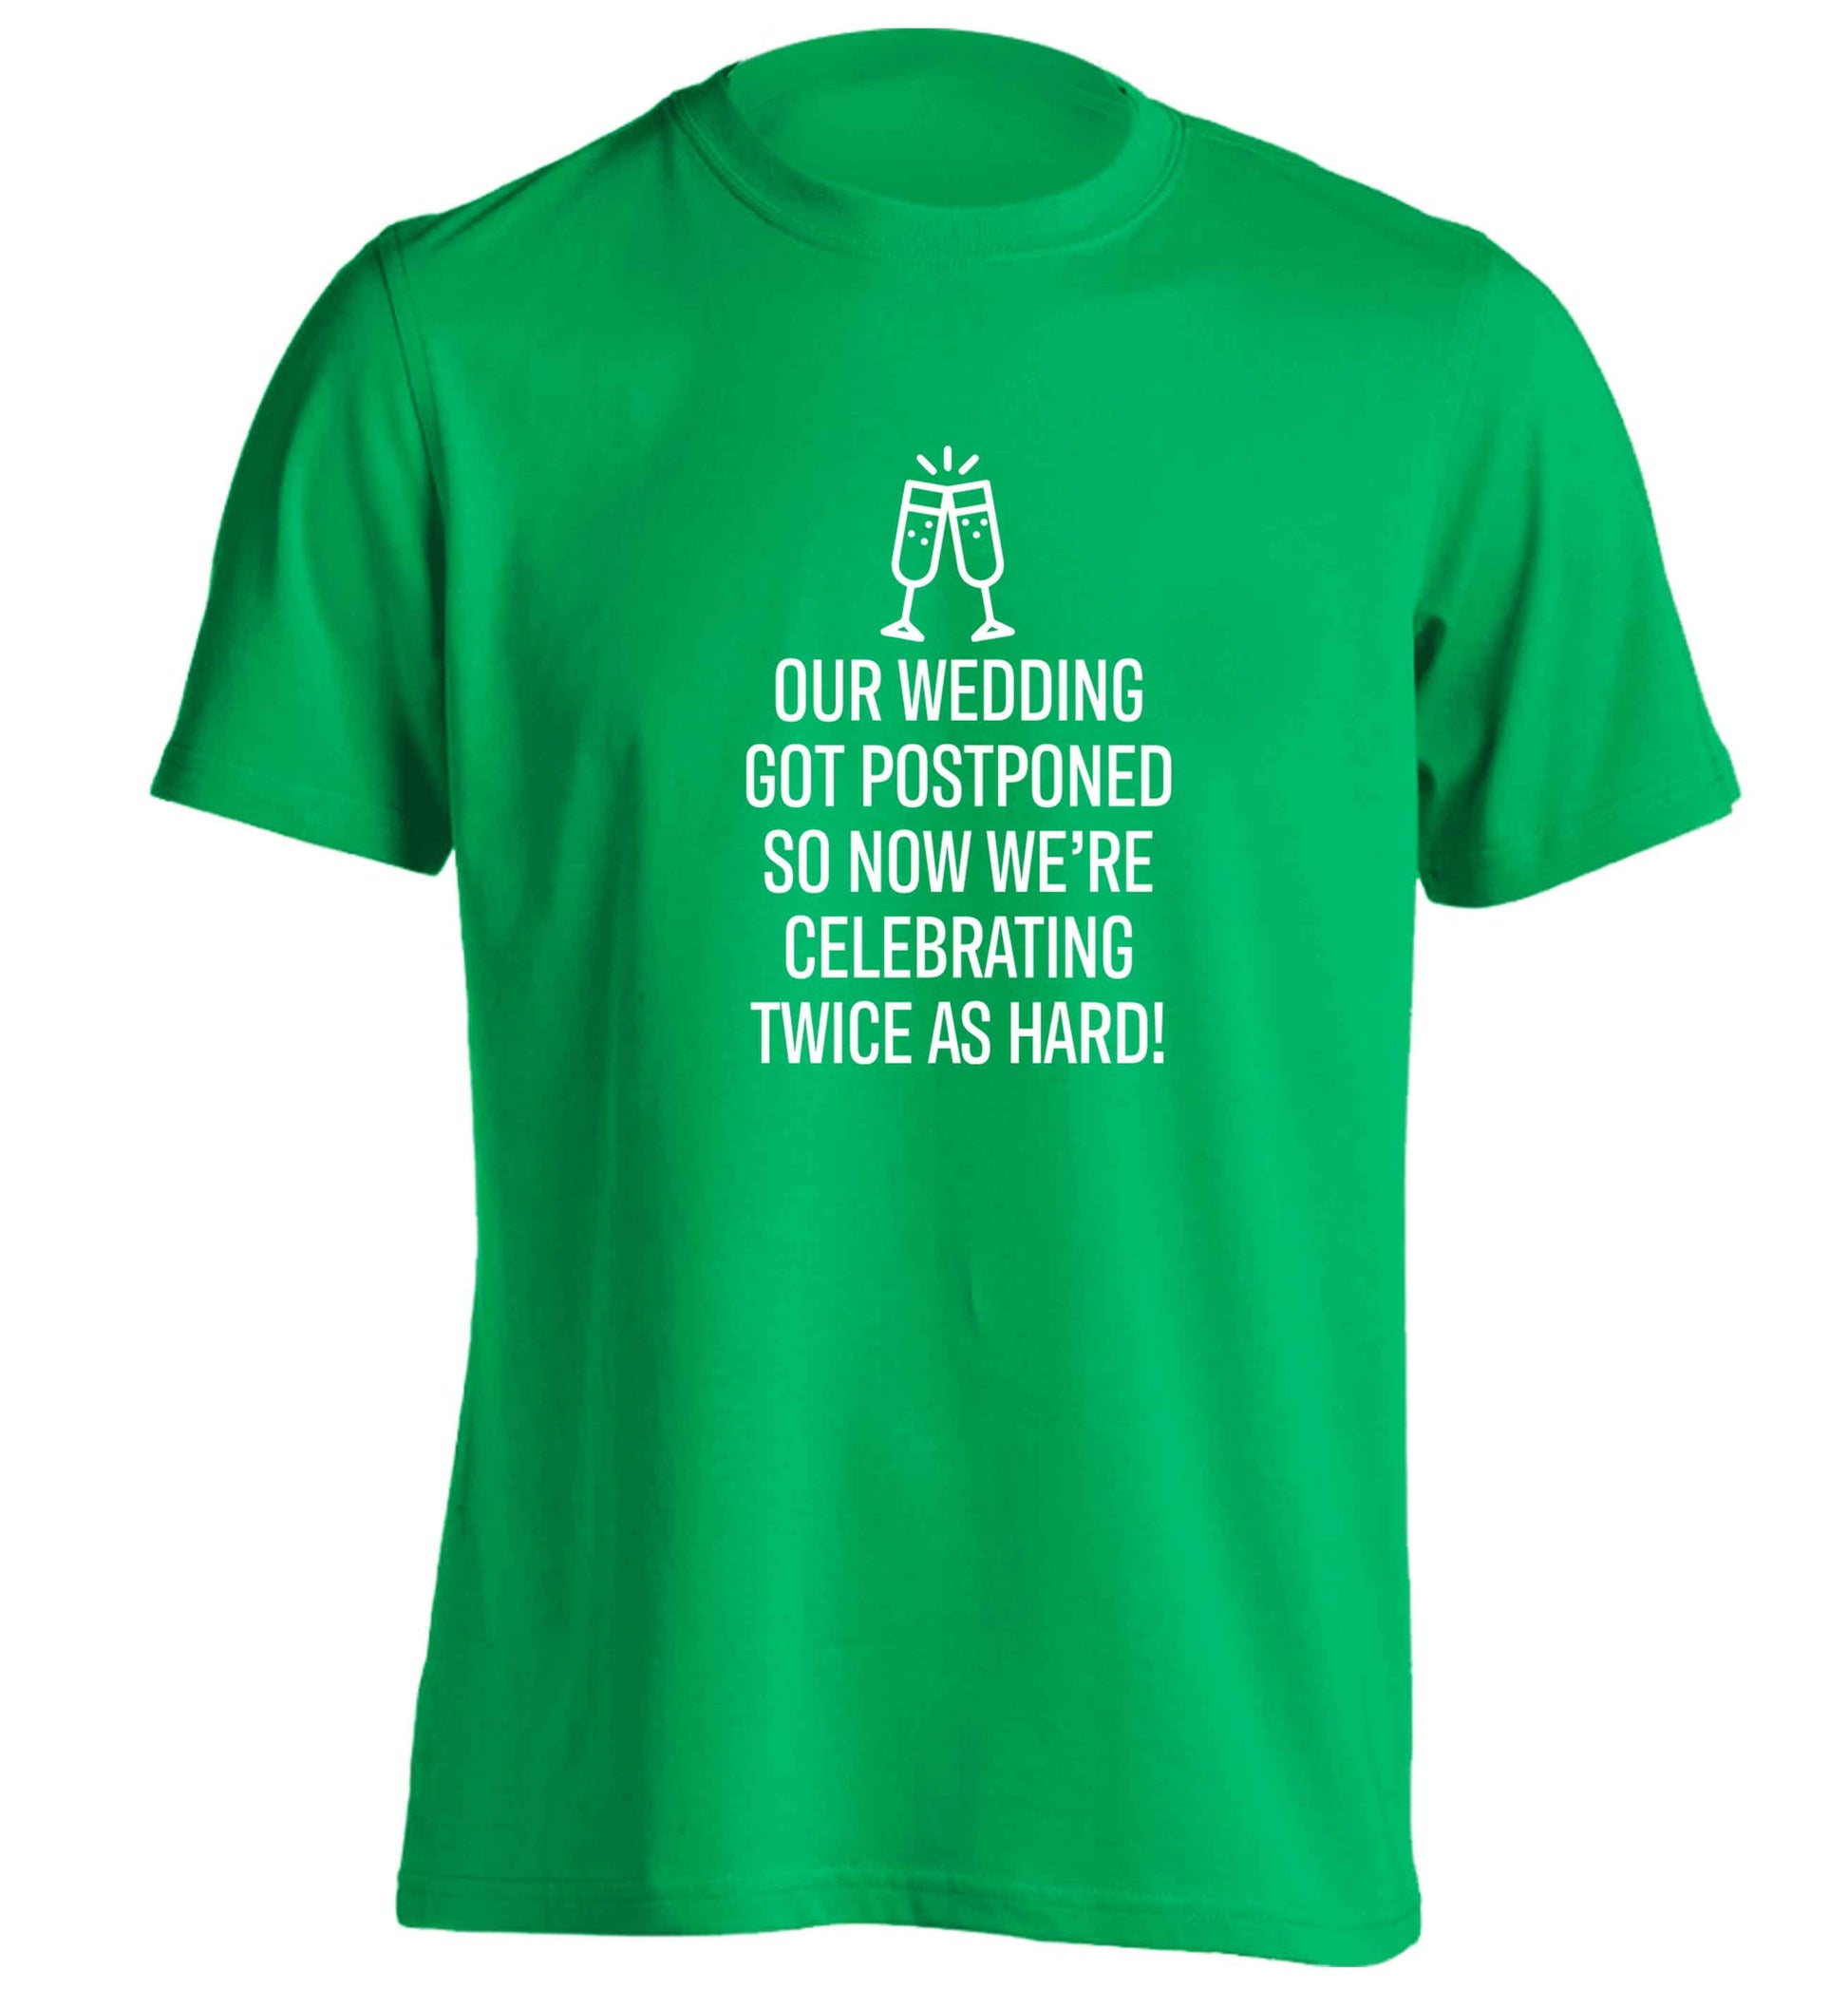 Postponed wedding? Sounds like an excuse to party twice as hard!  adults unisex green Tshirt 2XL